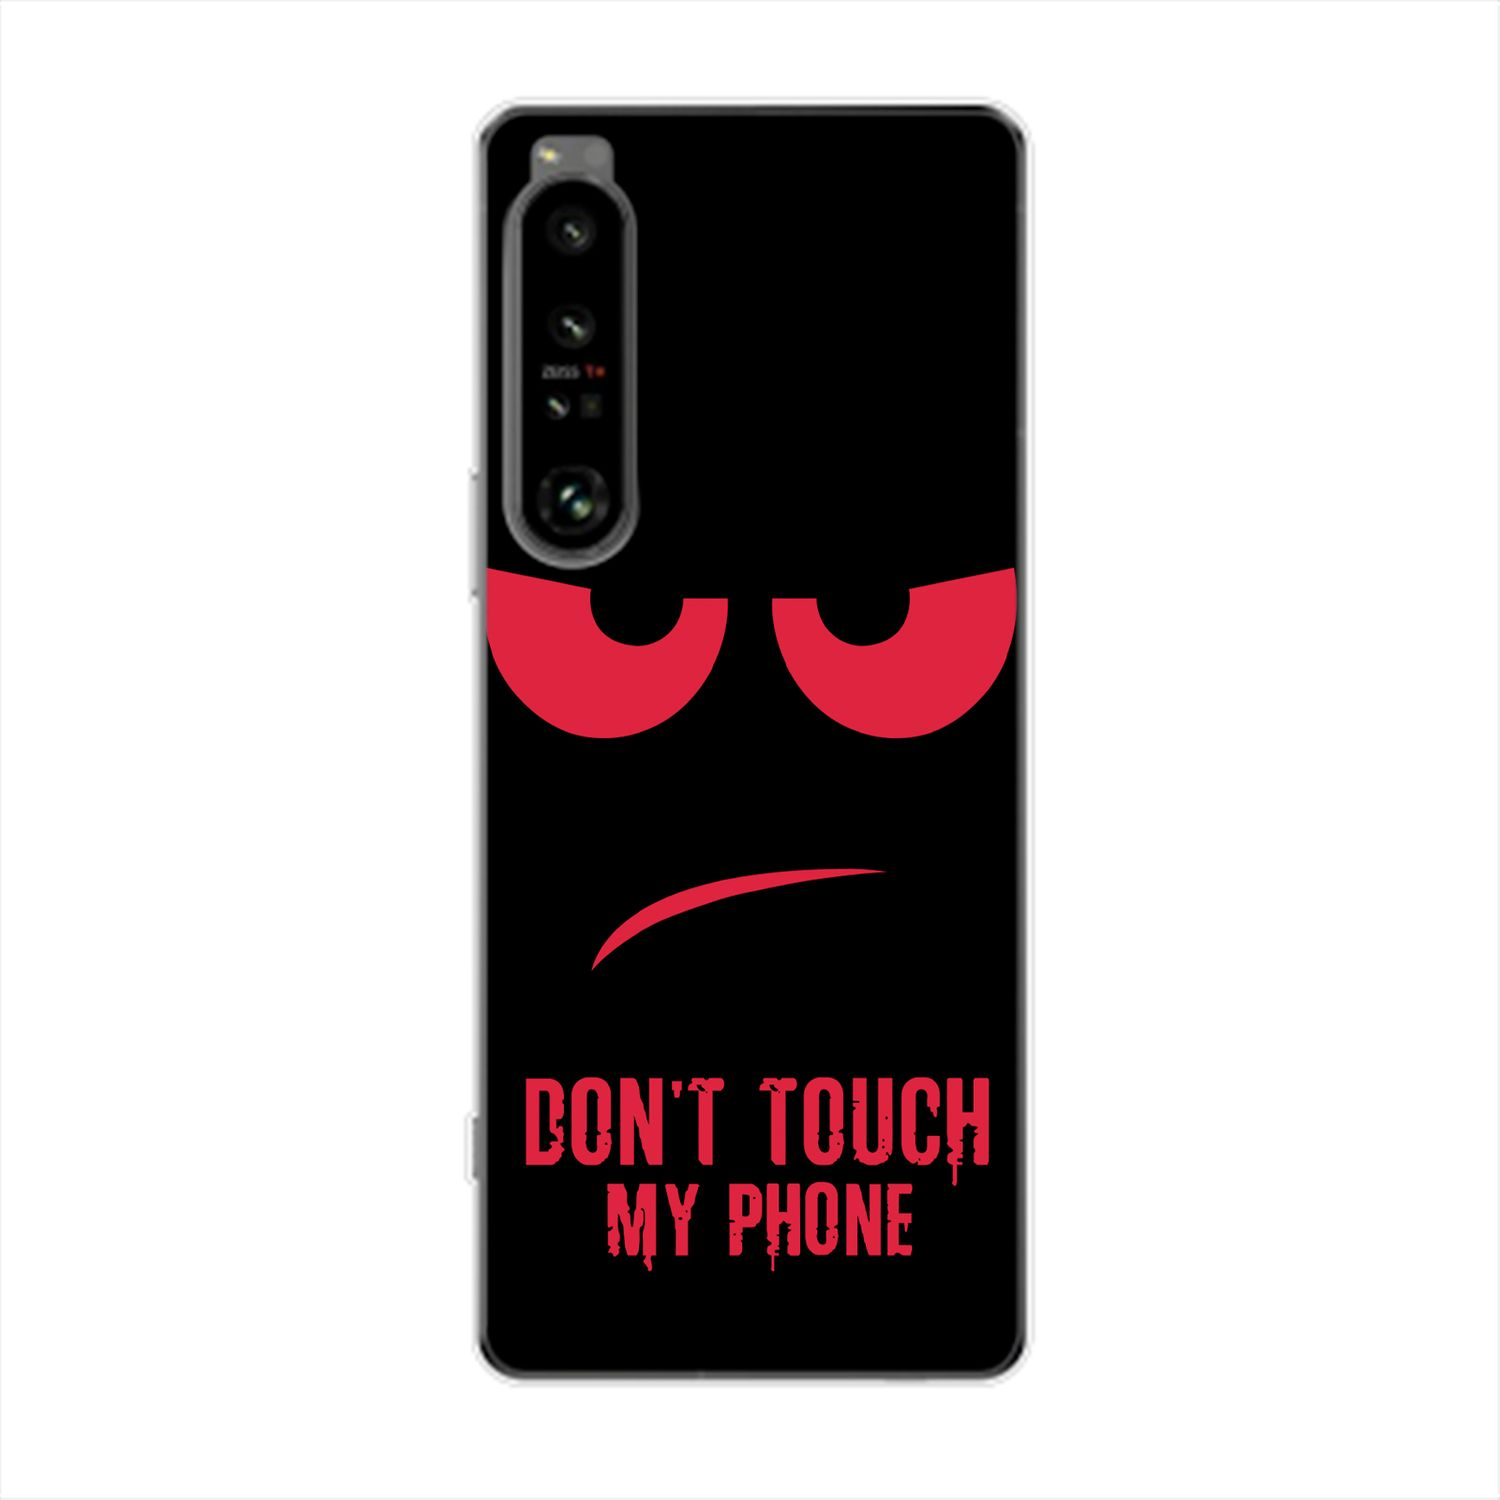 KÖNIG DESIGN Case, Touch My Xperia Phone Sony, Dont IV, Backcover, Rot 1